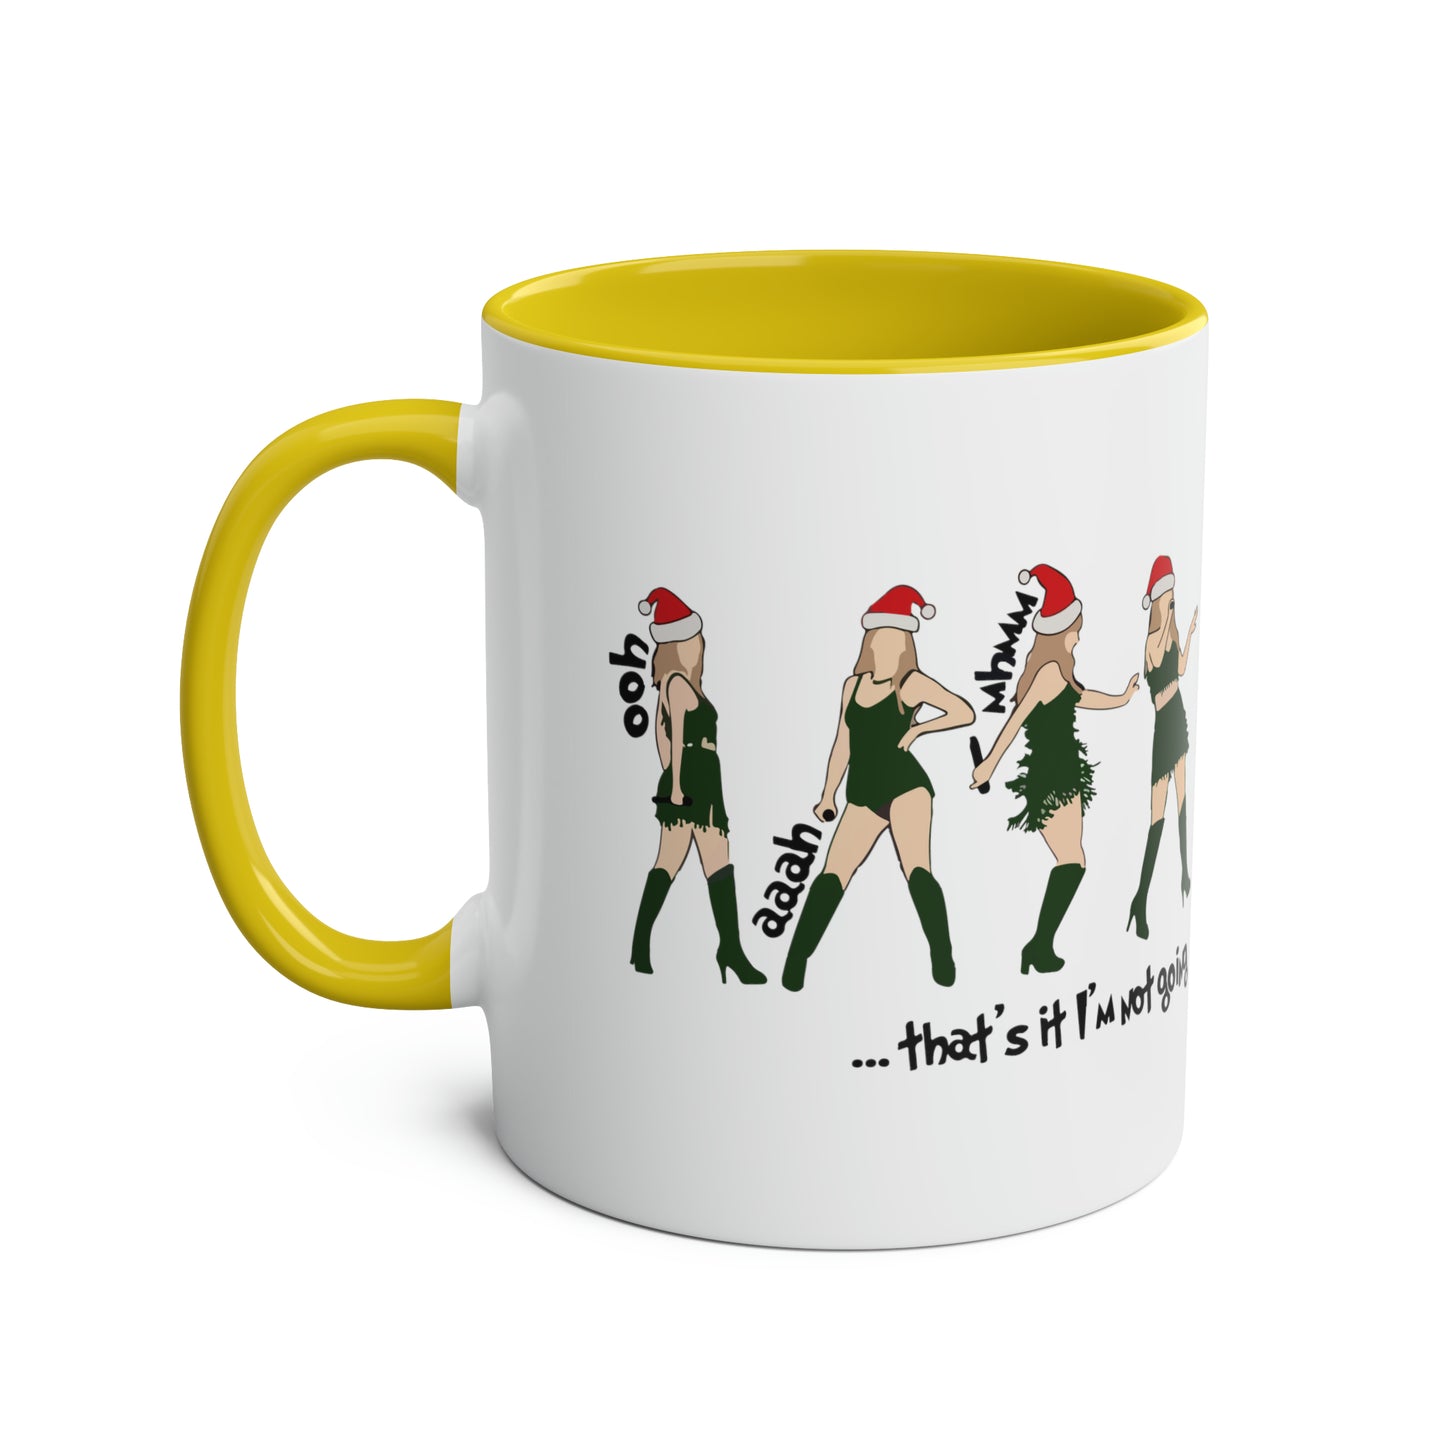 ... that's it, I'm not going / Taylor's Christmas Mug